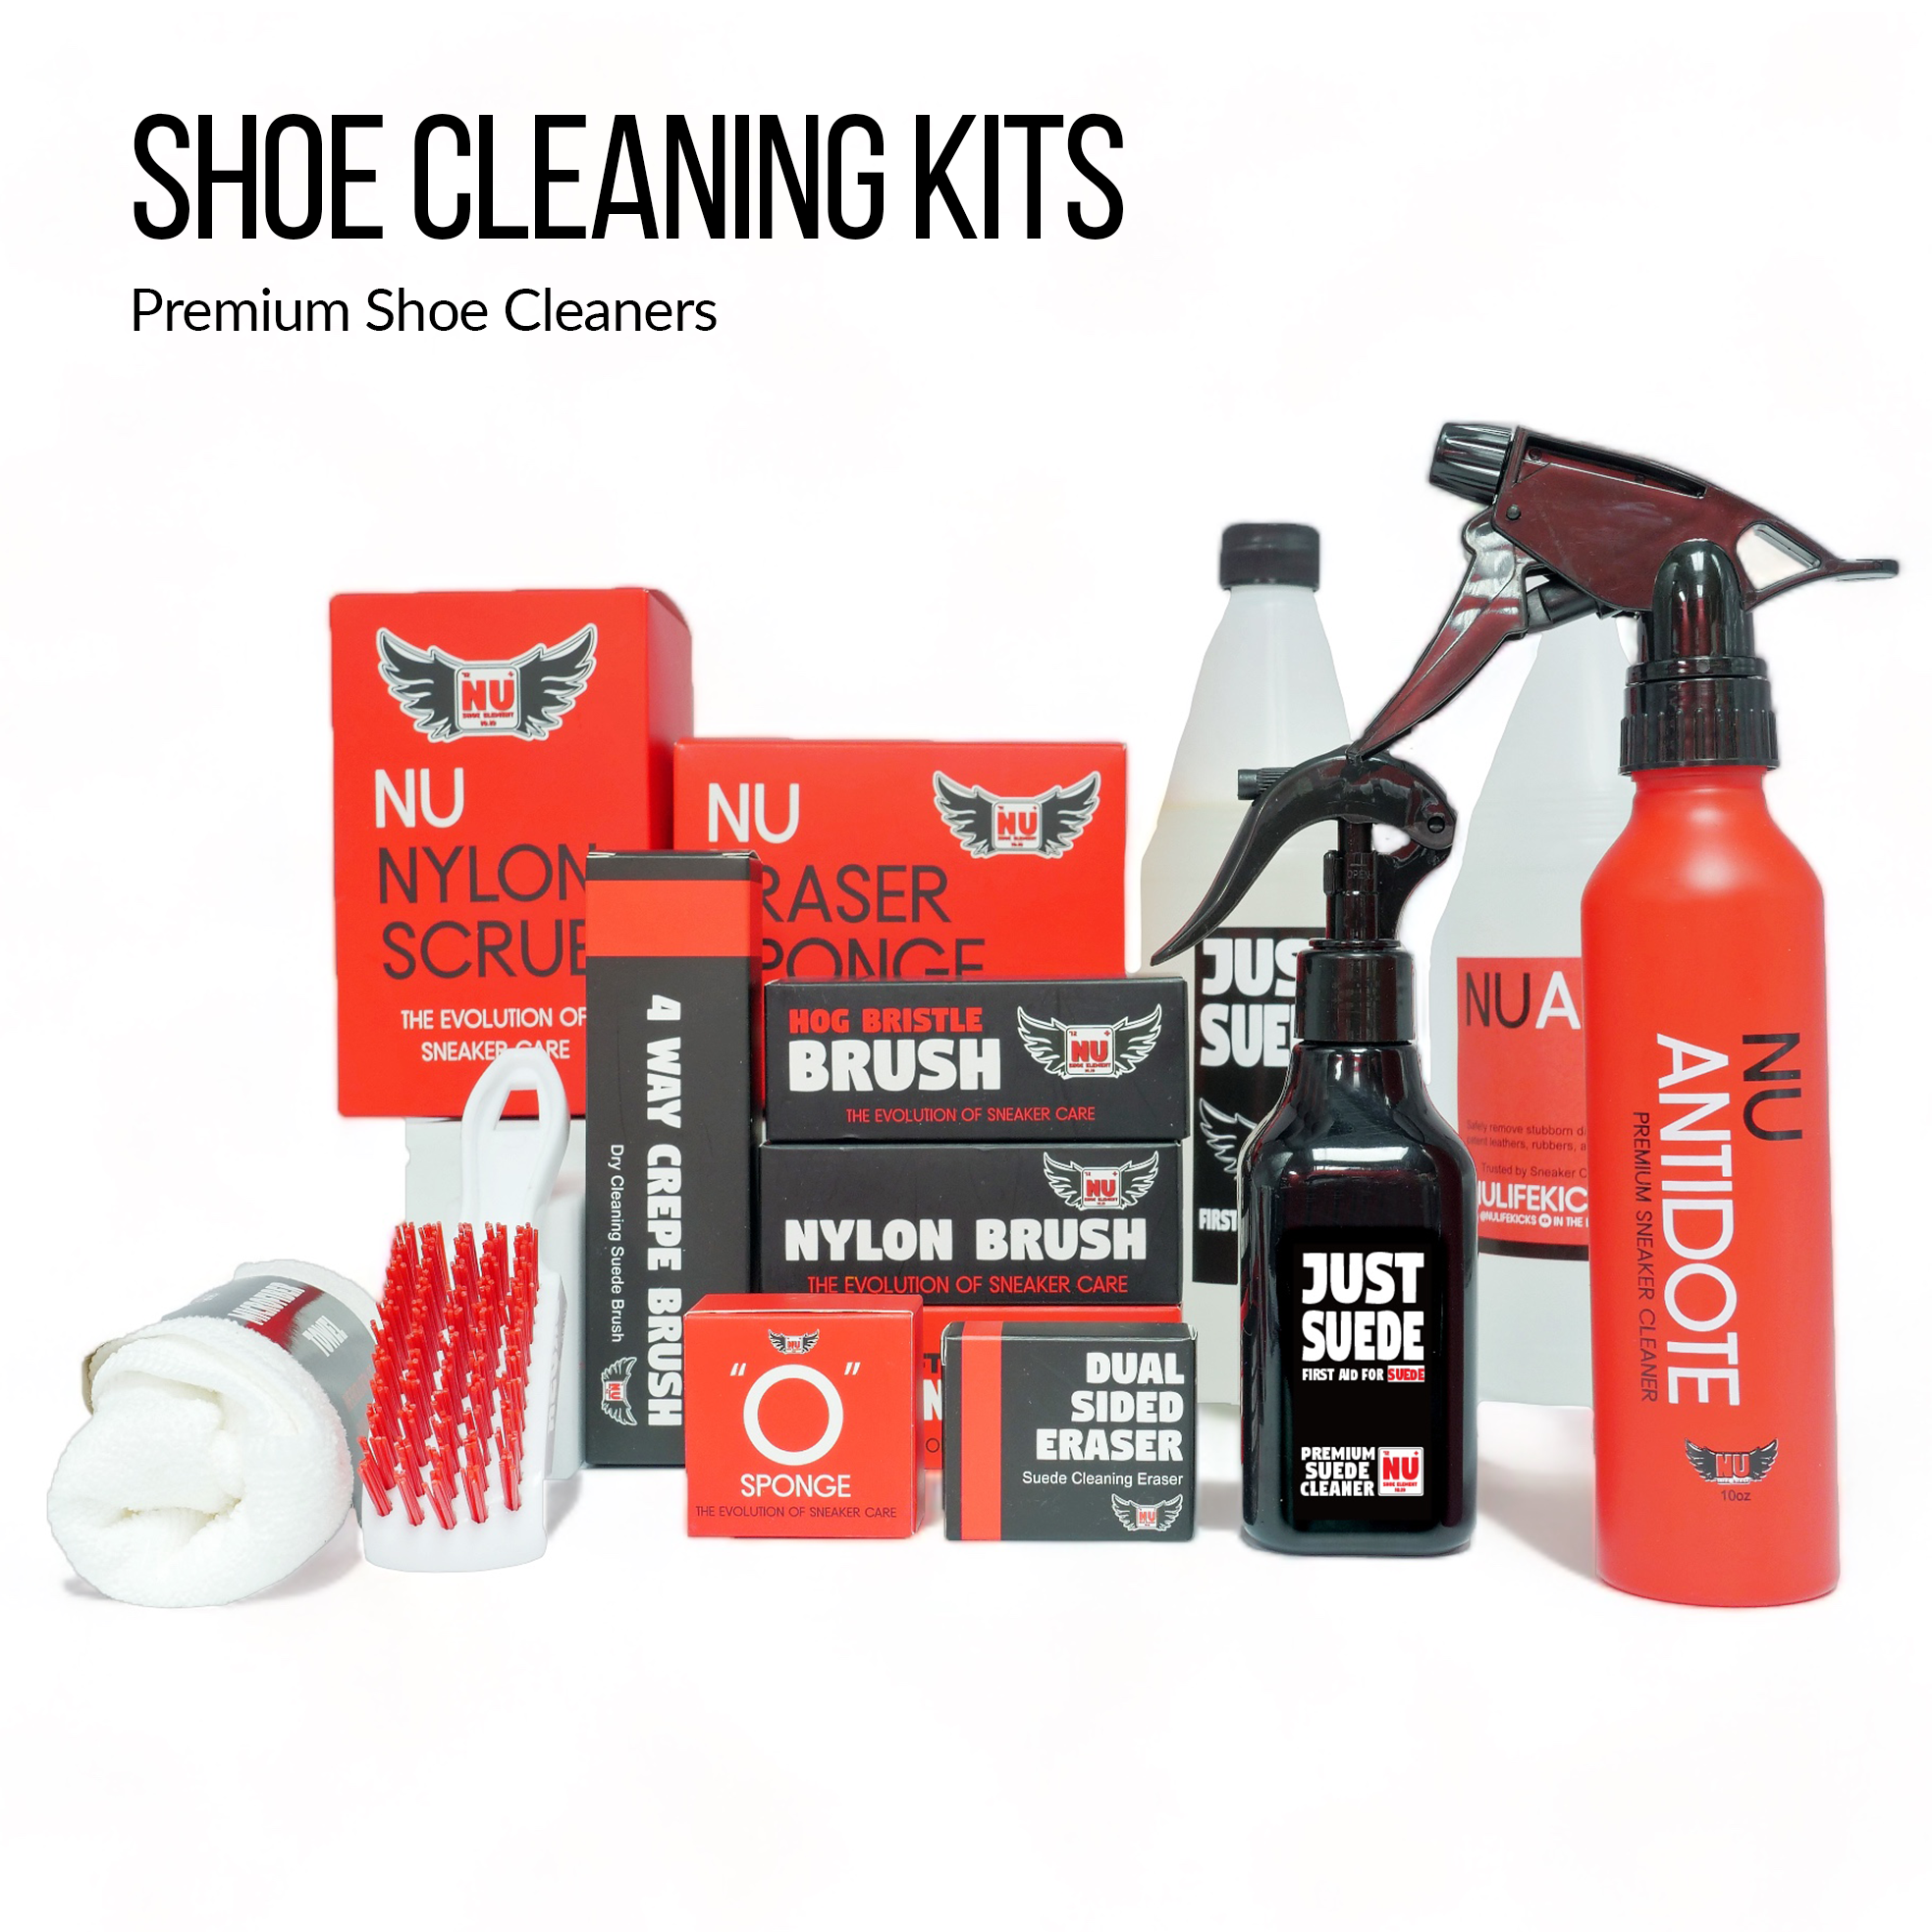 Shoe Cleaning Kits